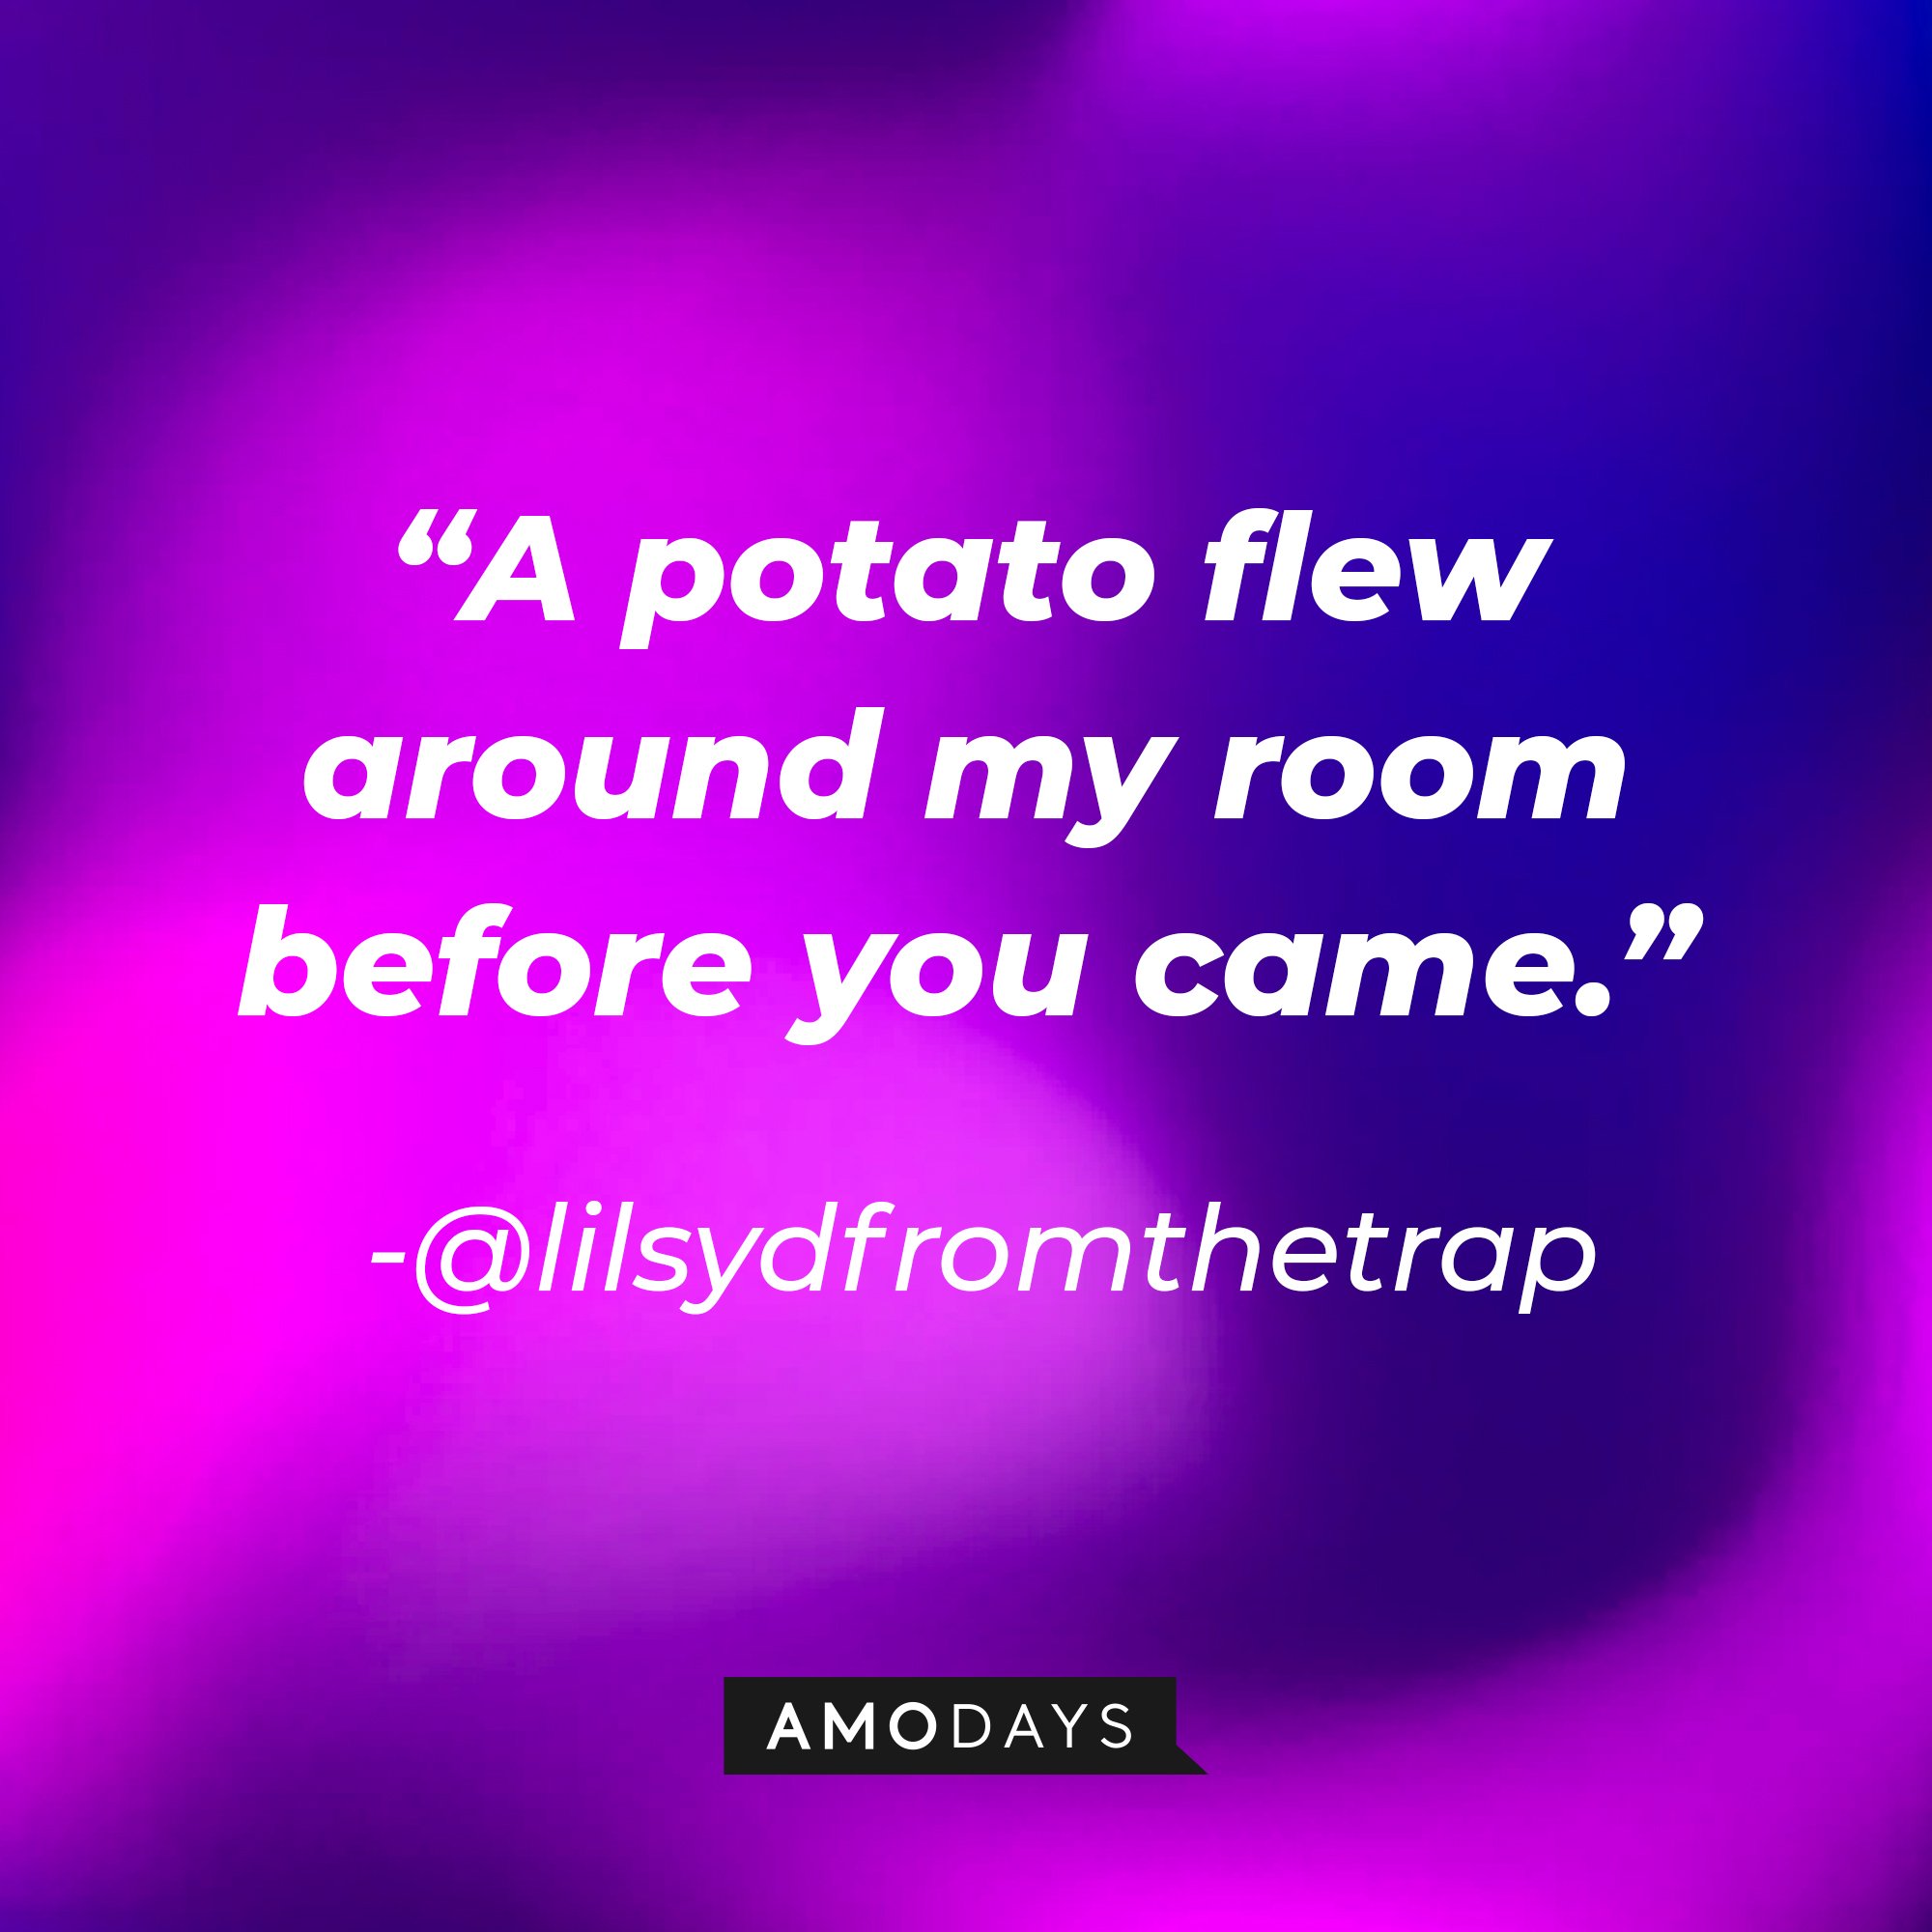 @lilsydfromthetrap's quote: “A potato flew around my room before you came.” | Image: AmoDays